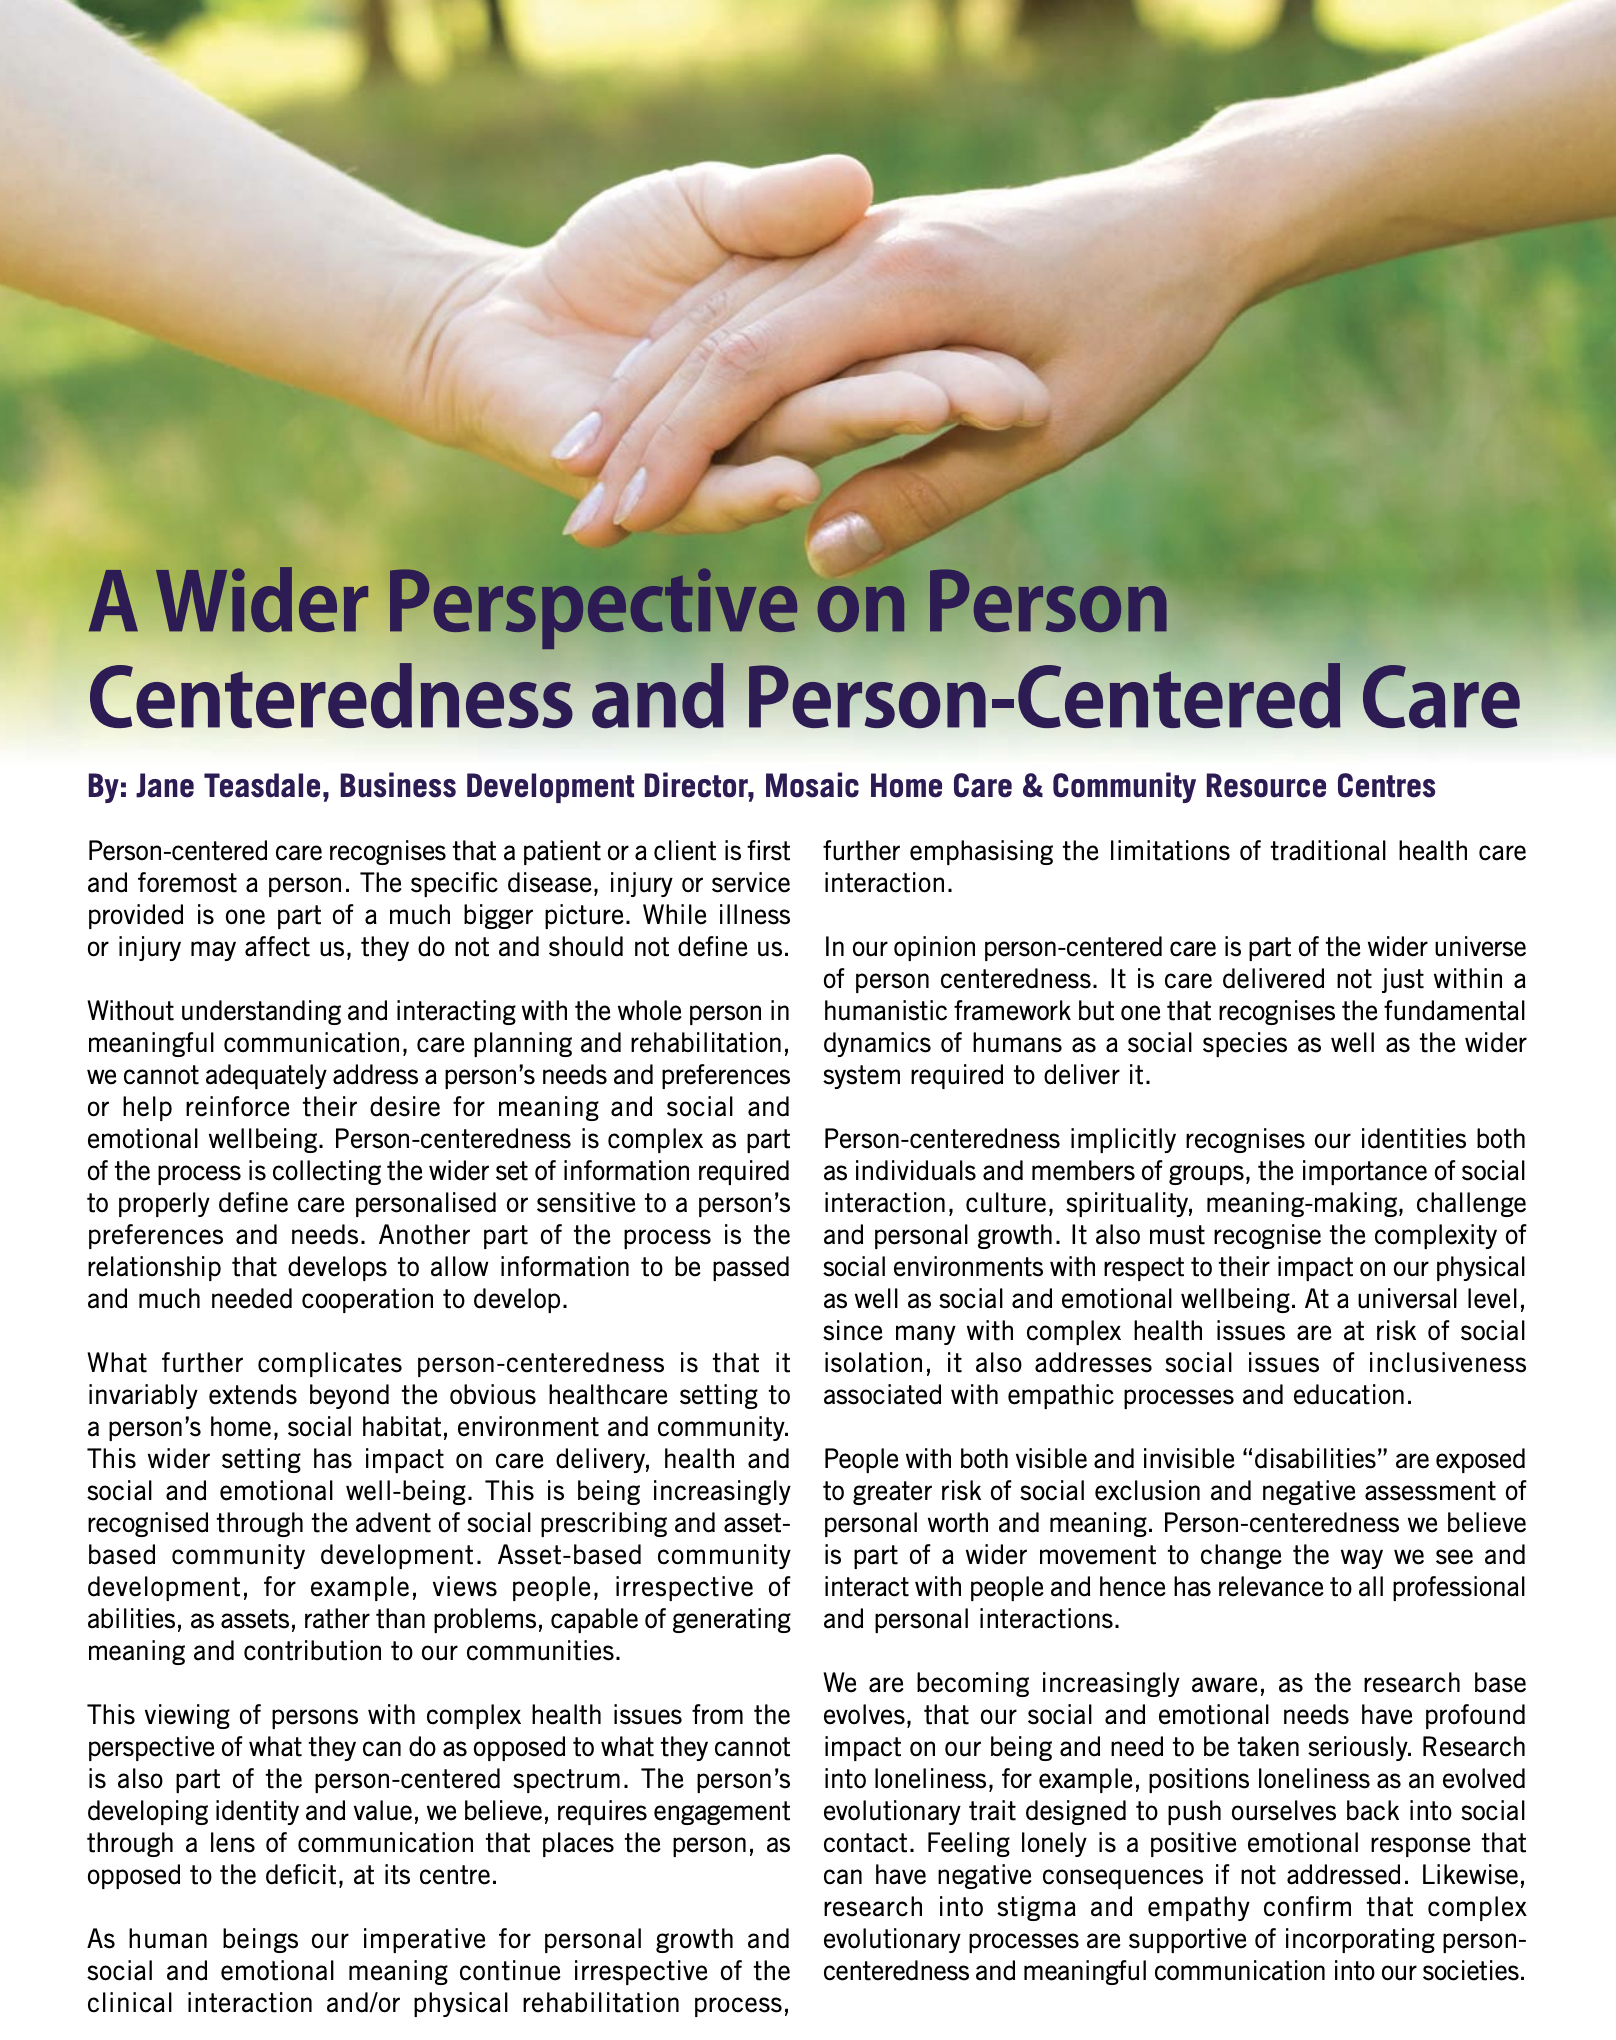 A Wider Perspective on Person Centeredness and Person-Centered Care